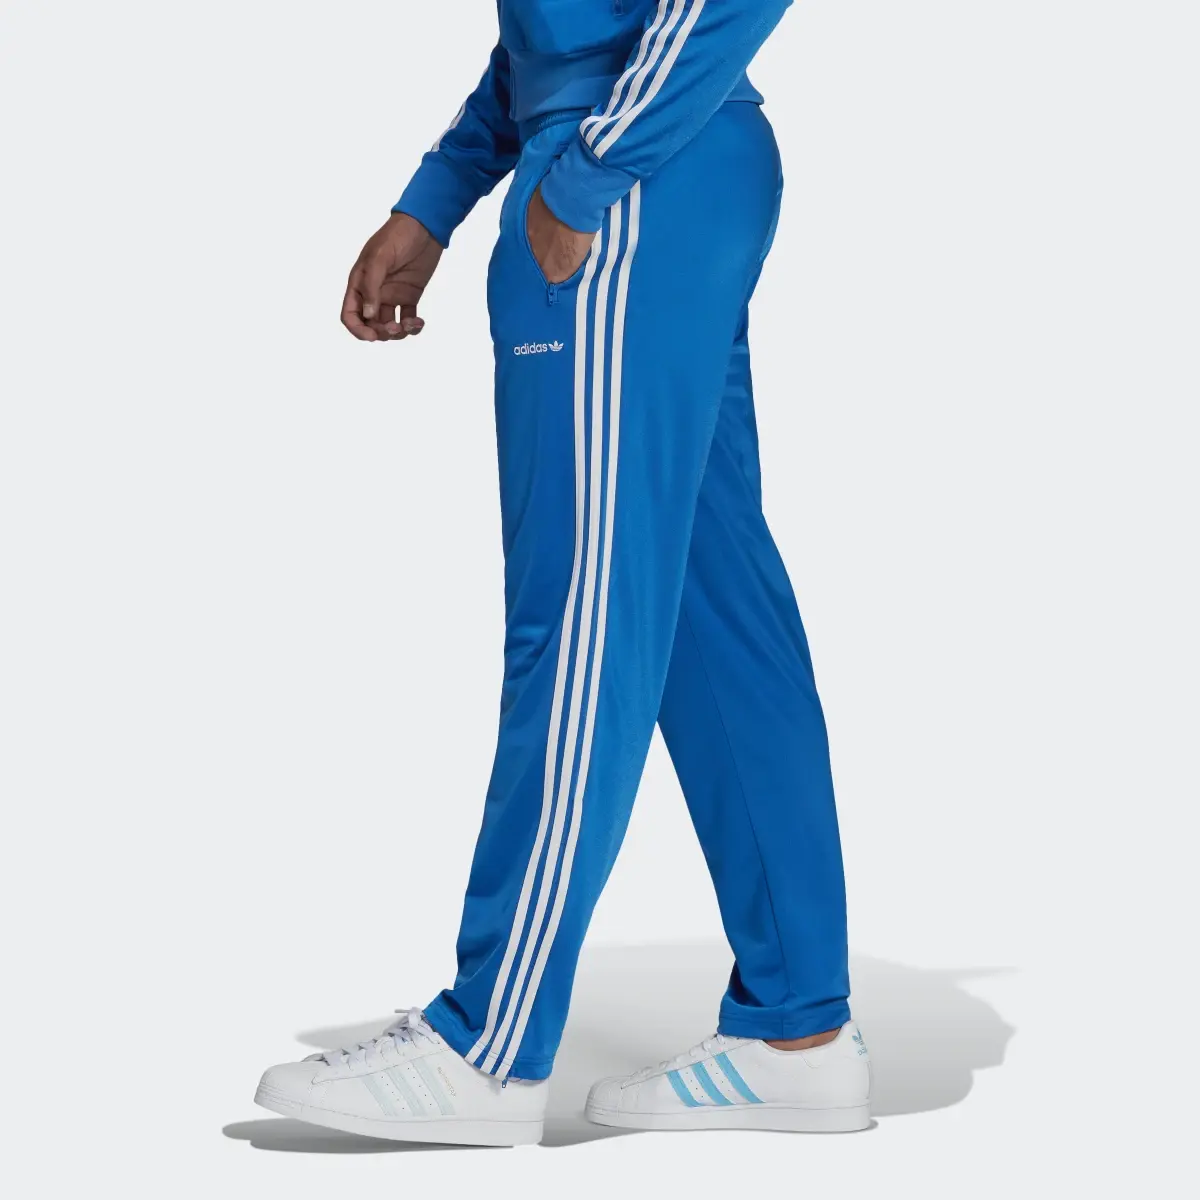 Adidas Graphic Common Memory Tracksuit Bottoms. 2